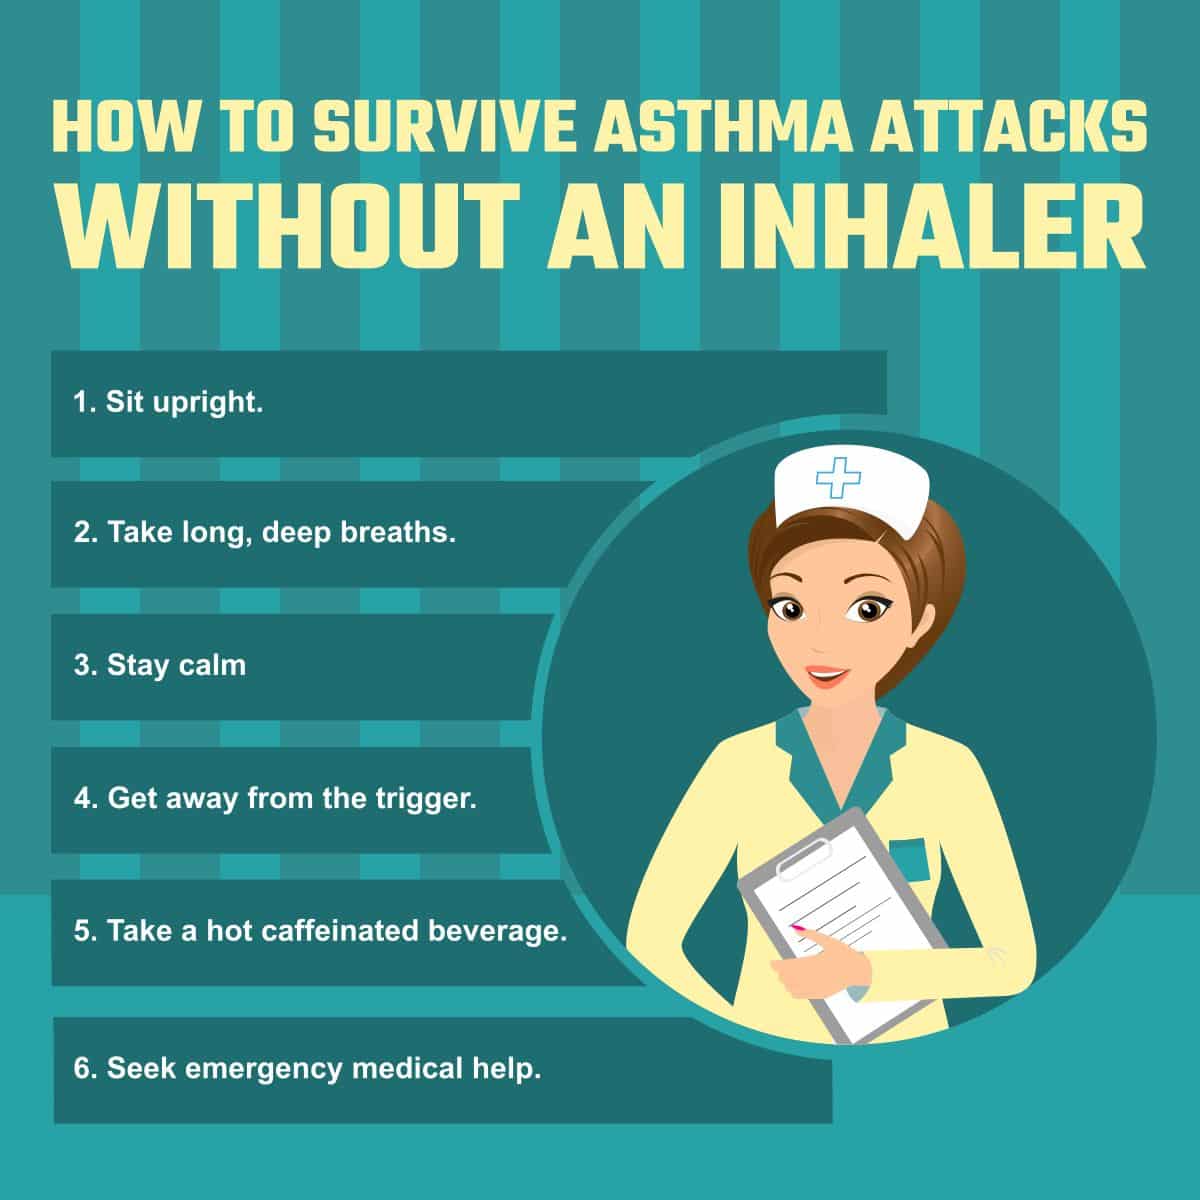 How To Use An Inhaler For Asthma